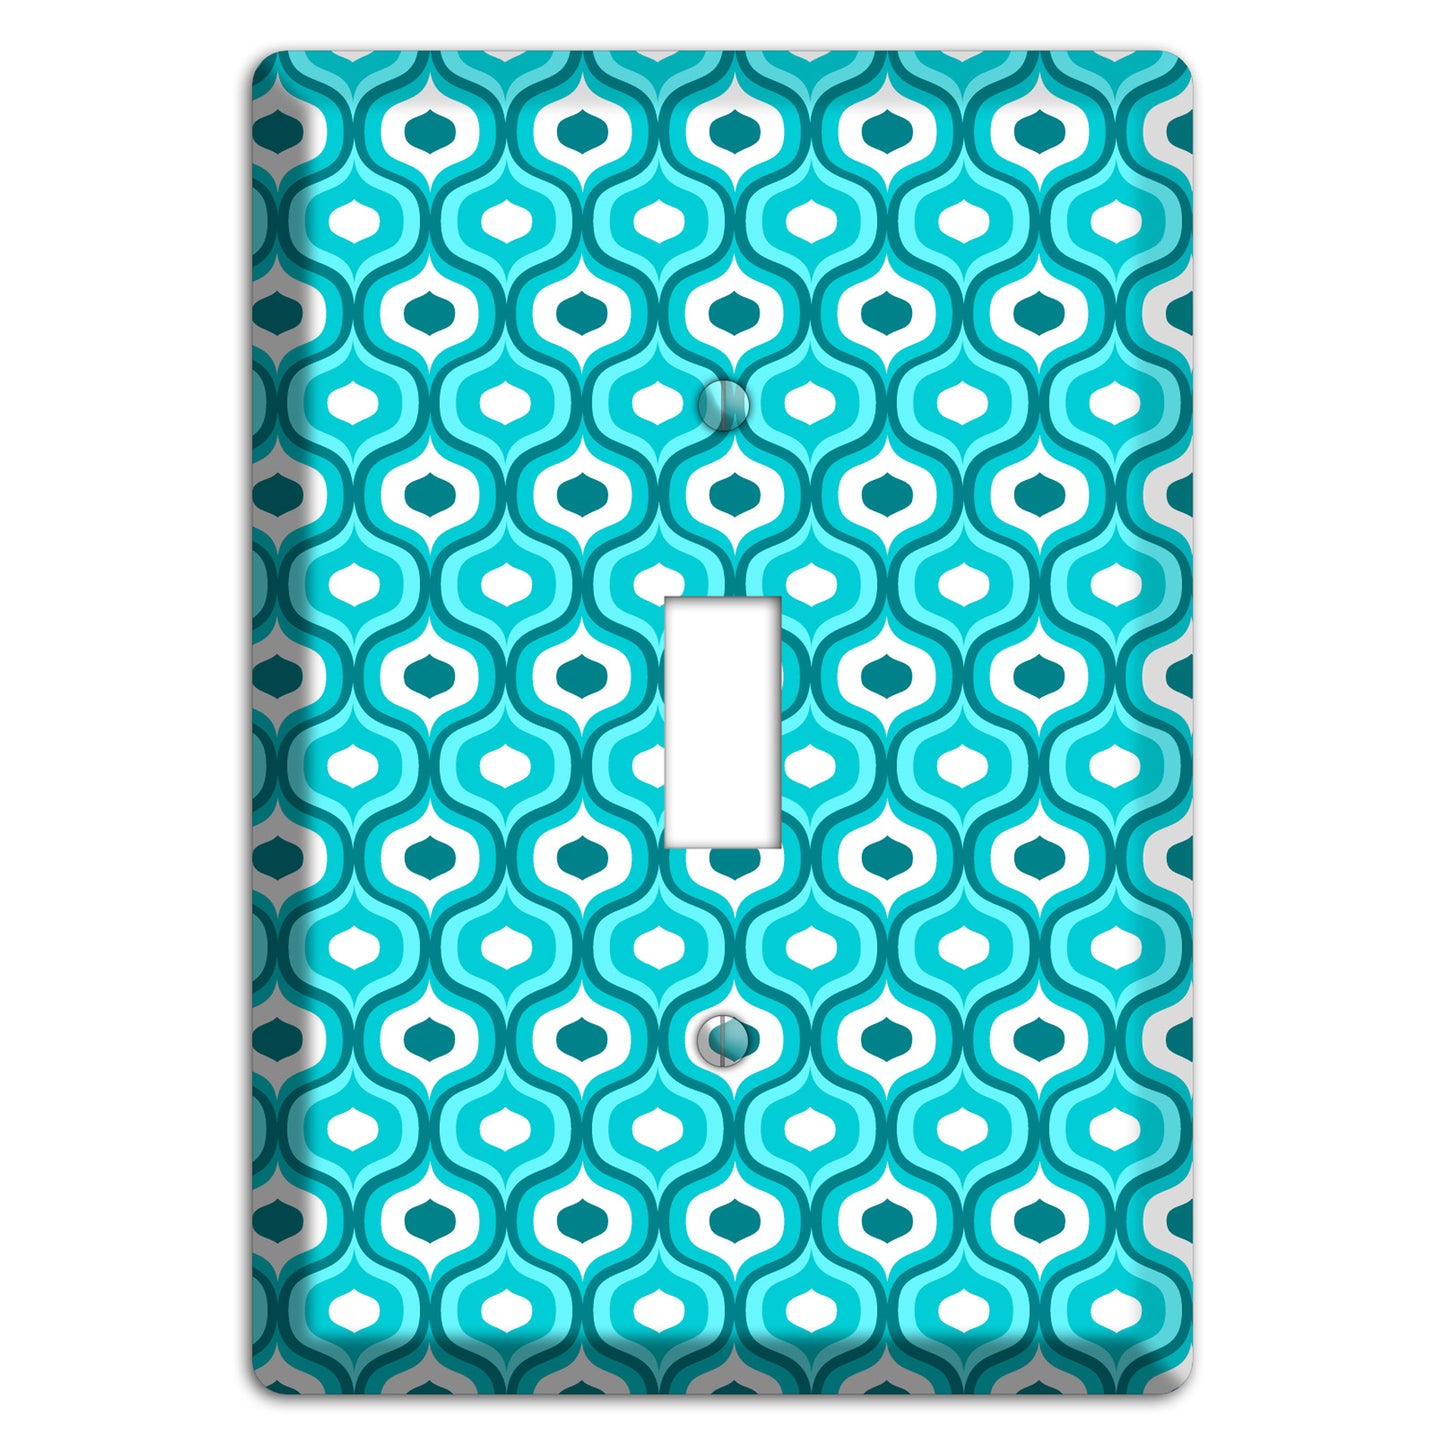 Multi Turquoise Double Scallop 2 Cover Plates